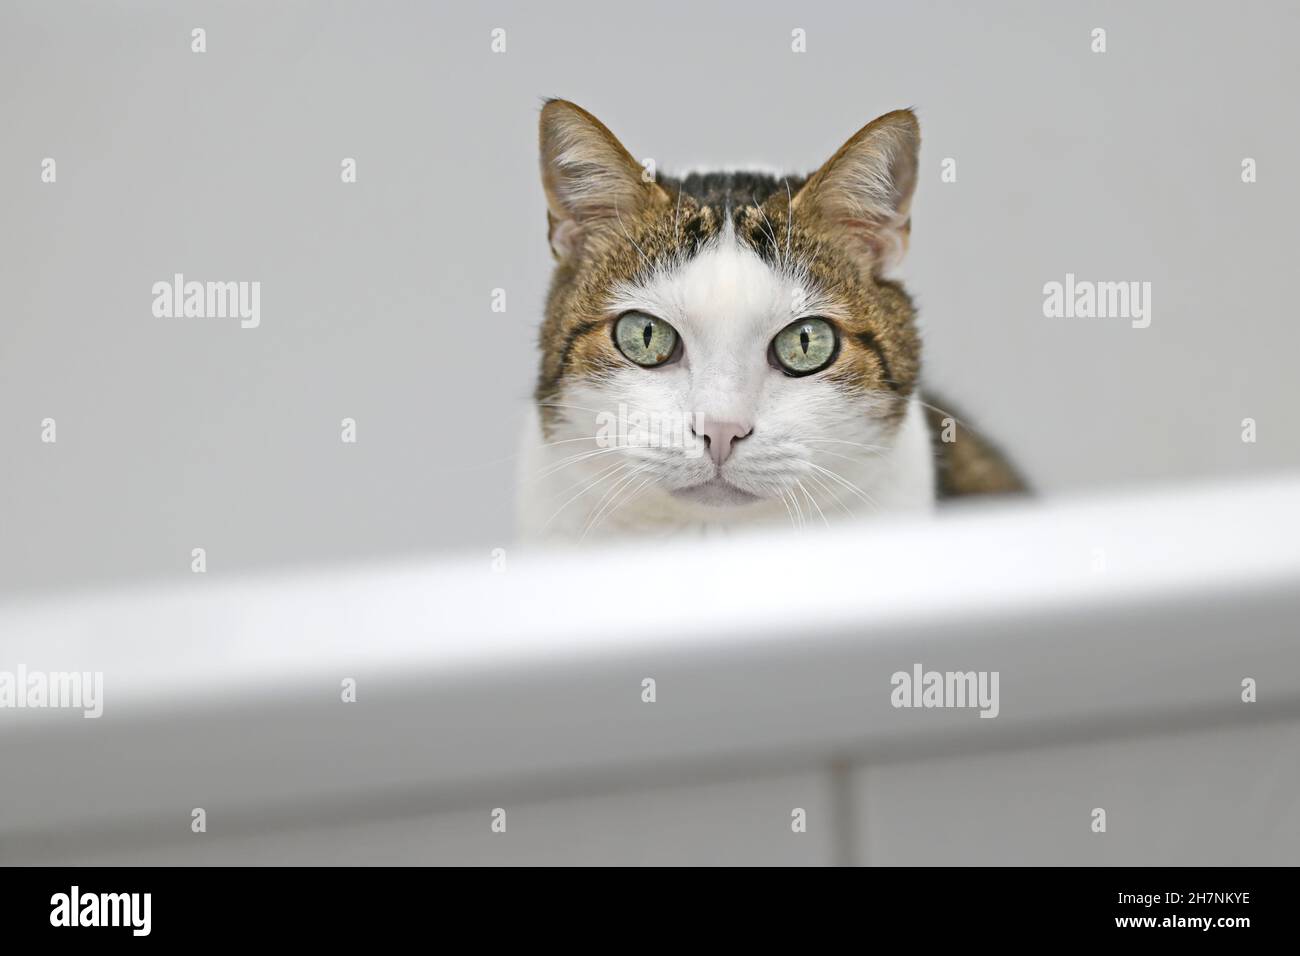 Cute tabby cat peering over the edge of bathtube. Horizontal image with selective focus Stock Photo